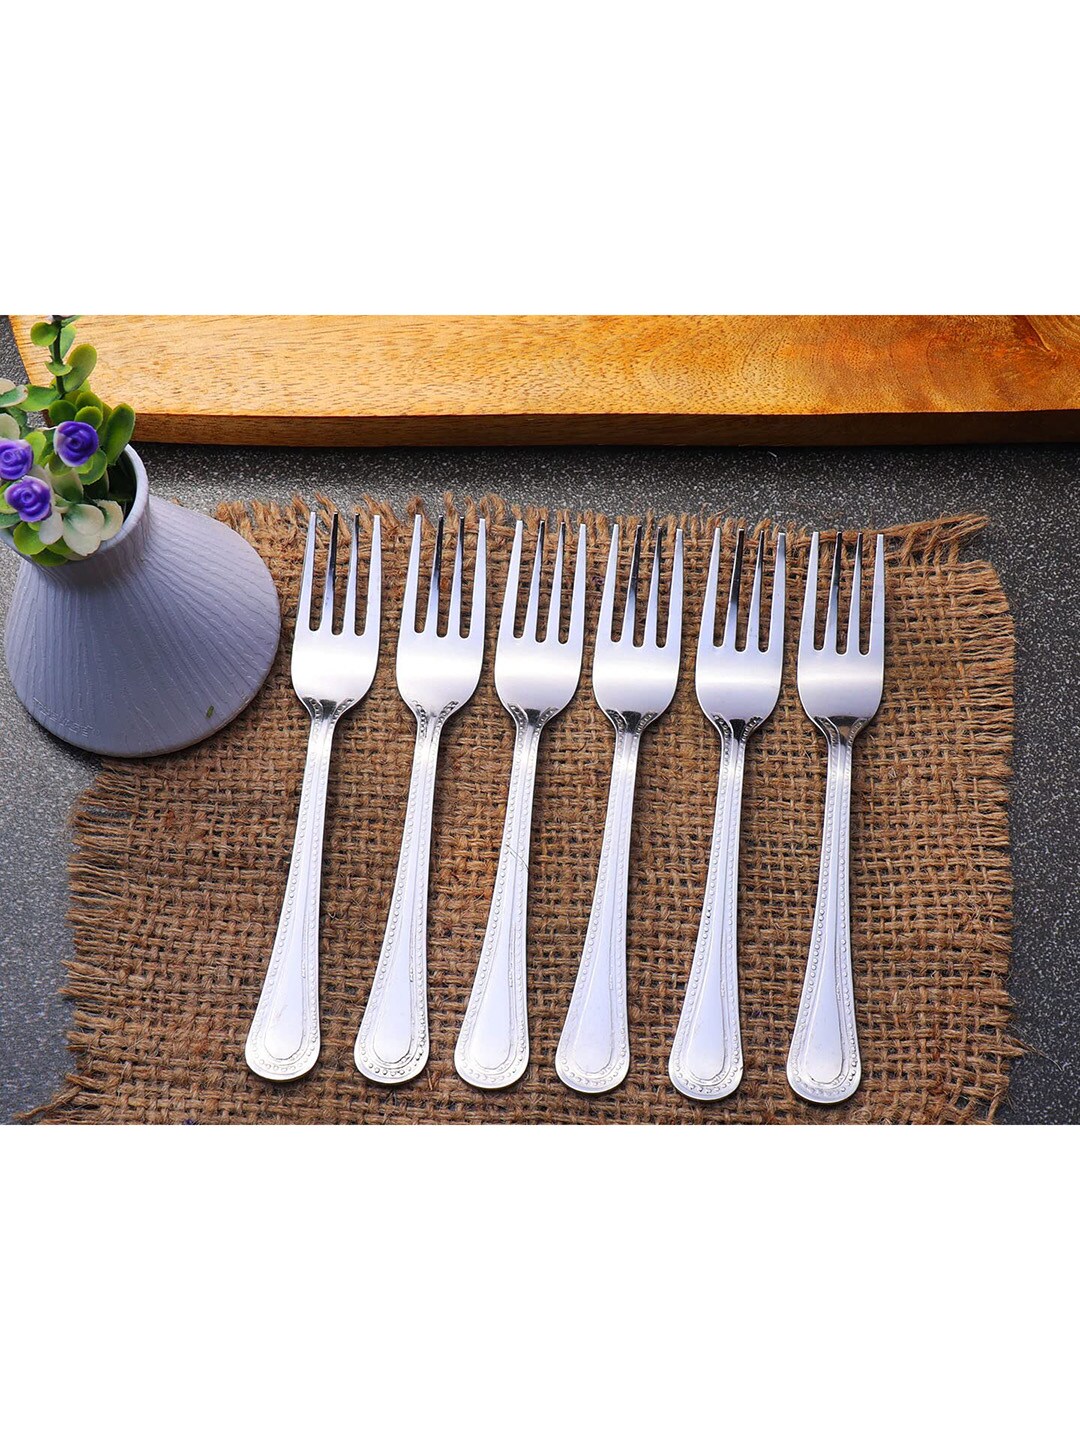 ZEVORA Set Of 6 Silver-Toned Stainless Steel Forks Price in India